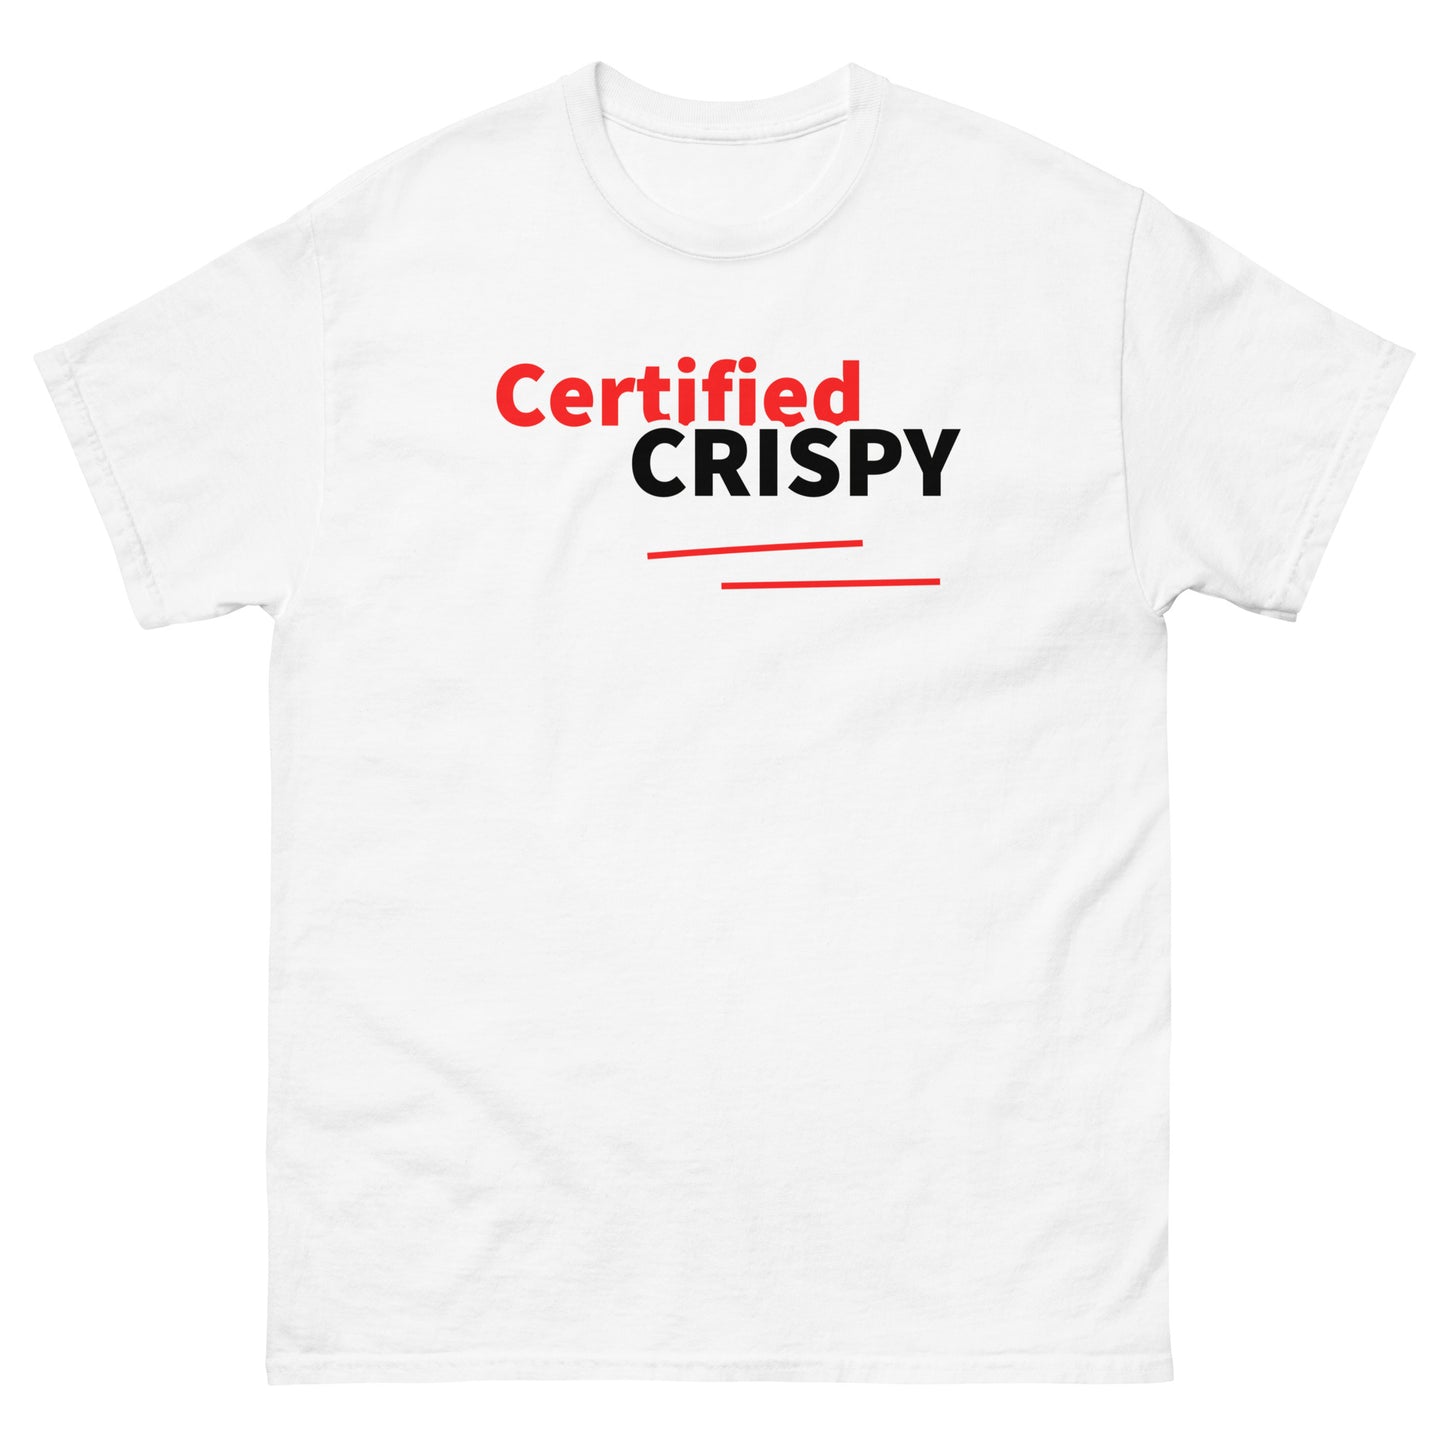 'Certified Crispy': The Indie Music Hunt Signature T-Shirt